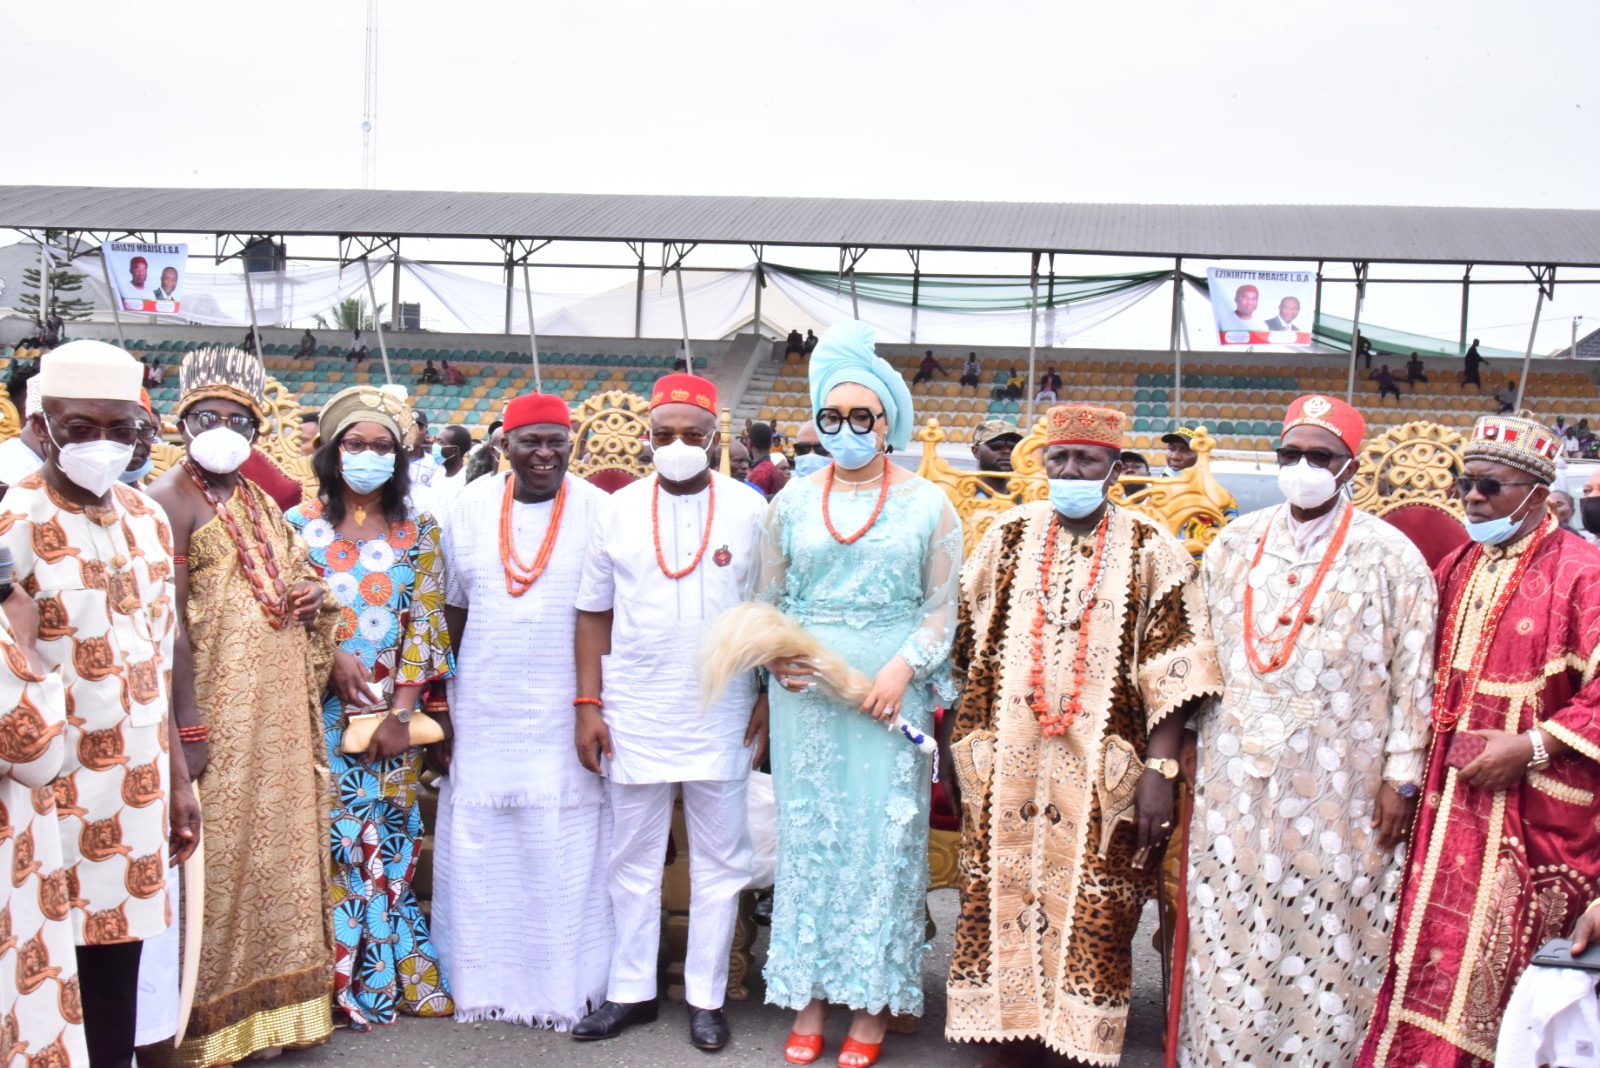 Confirment of the Chieftaincy Title of Onwa Na Etiri Oha of Owerri Zone on the Governor by the Ezes of Owerri Zone at the Heroes Square, Owerri